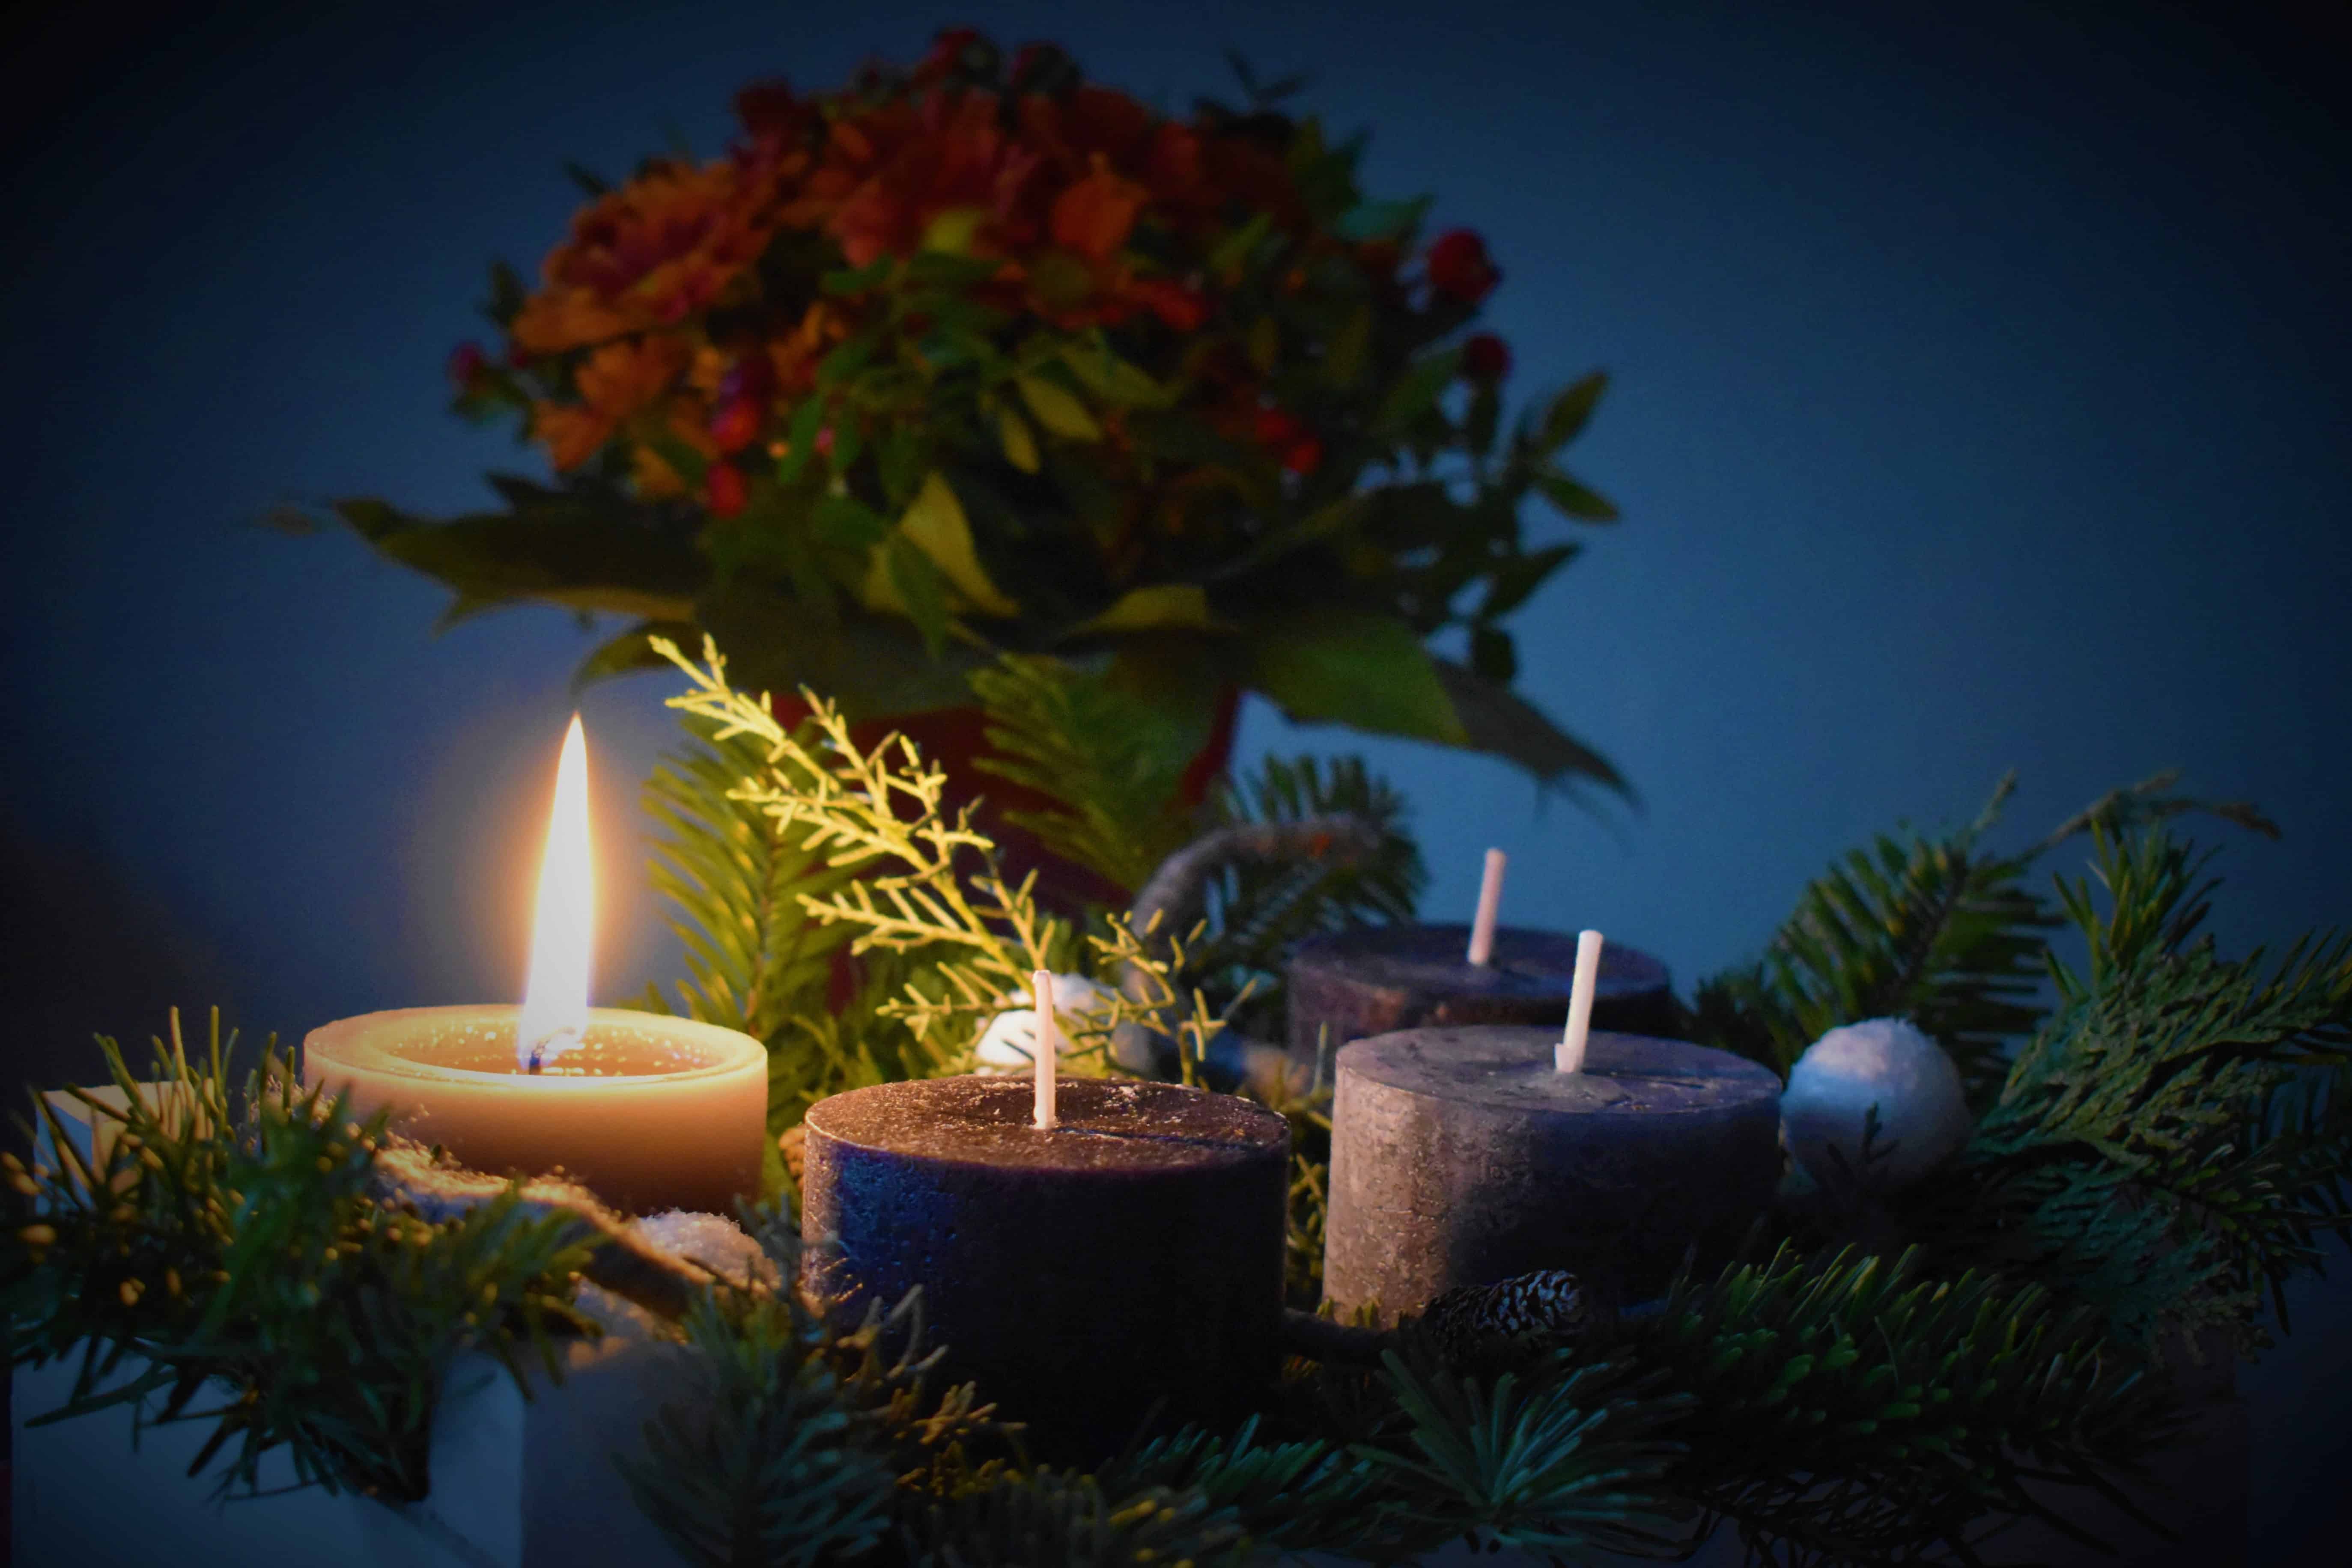 A Christmas candle burns brightly near a branch and other candles